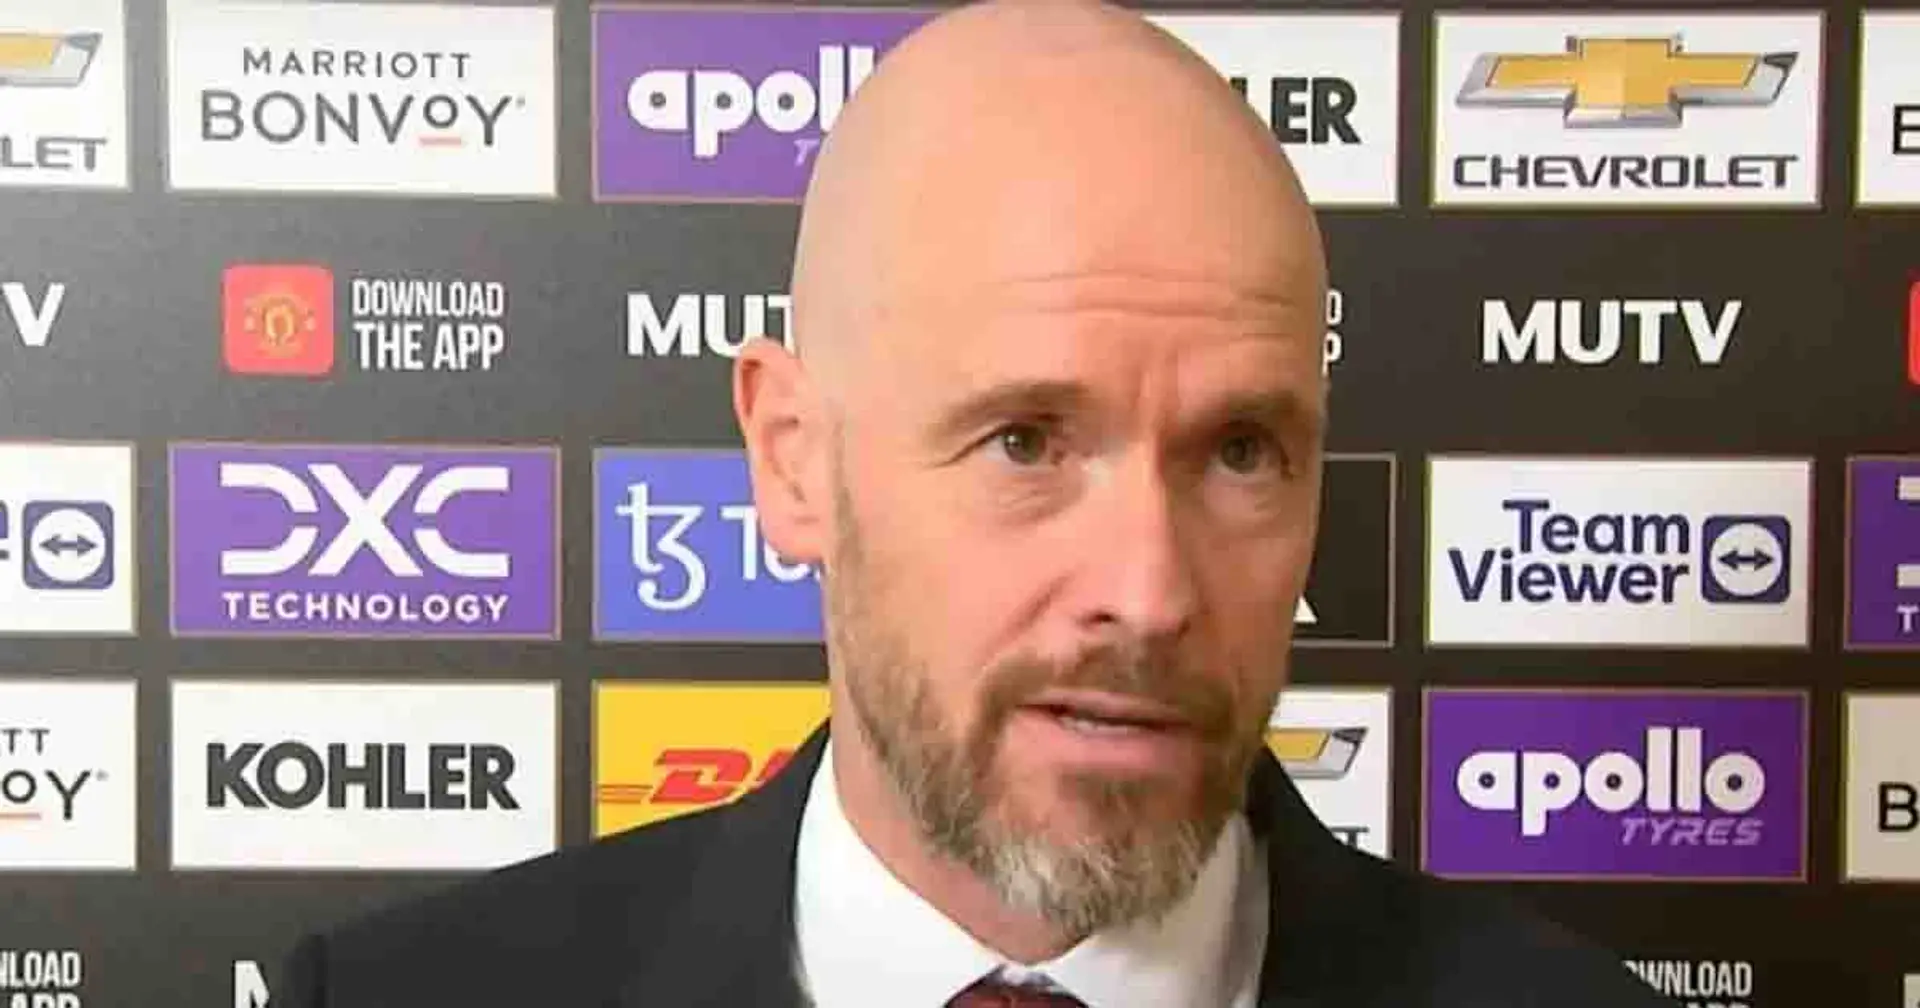 'We have two opportunities': Ten Hag responds to worries over Man United potentially missing out on European football